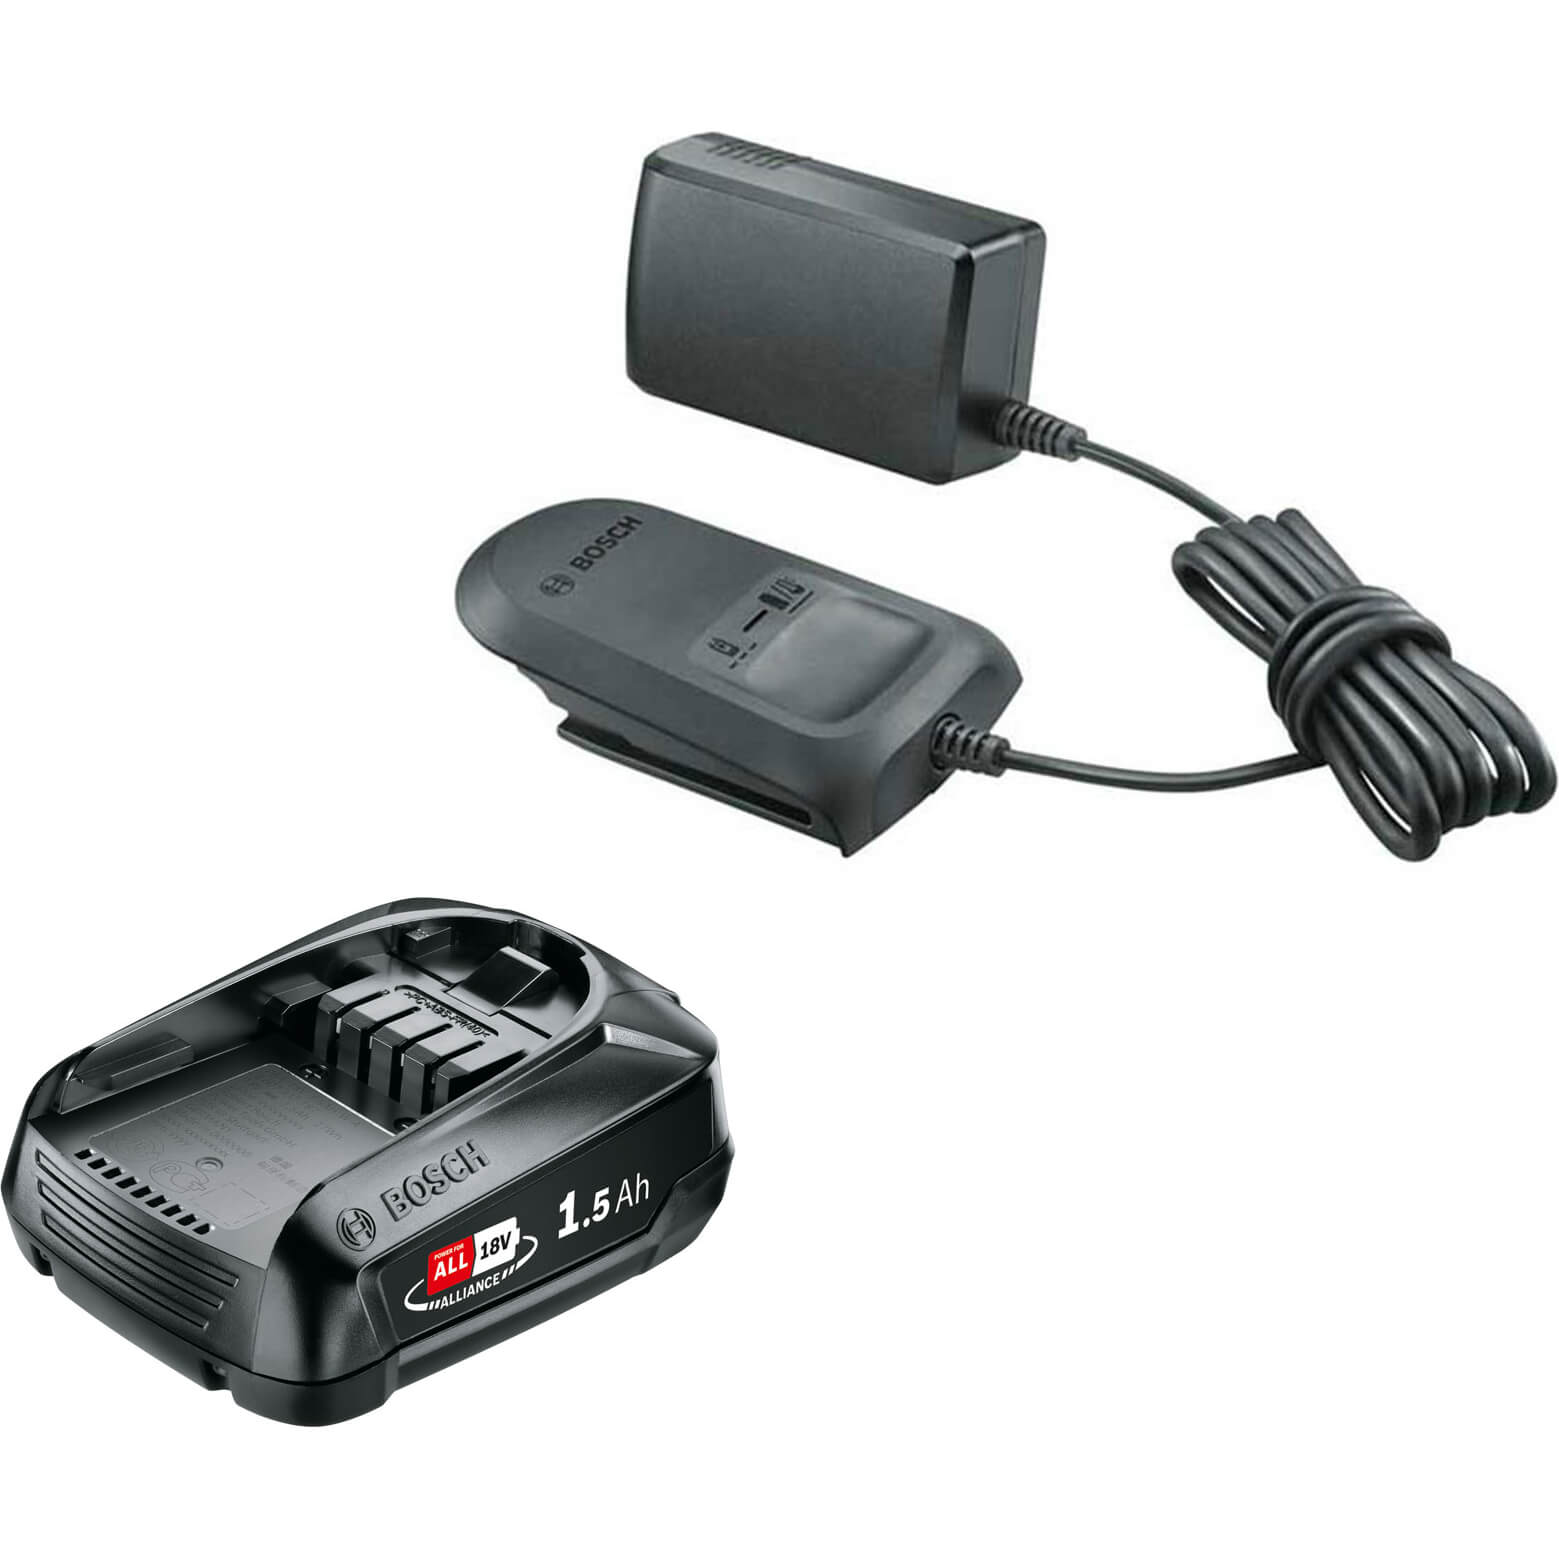 Image of Bosch Genuine GREEN 18v Cordless Li-ion Battery 1.5ah and AL 1810 Charger 1.5ah